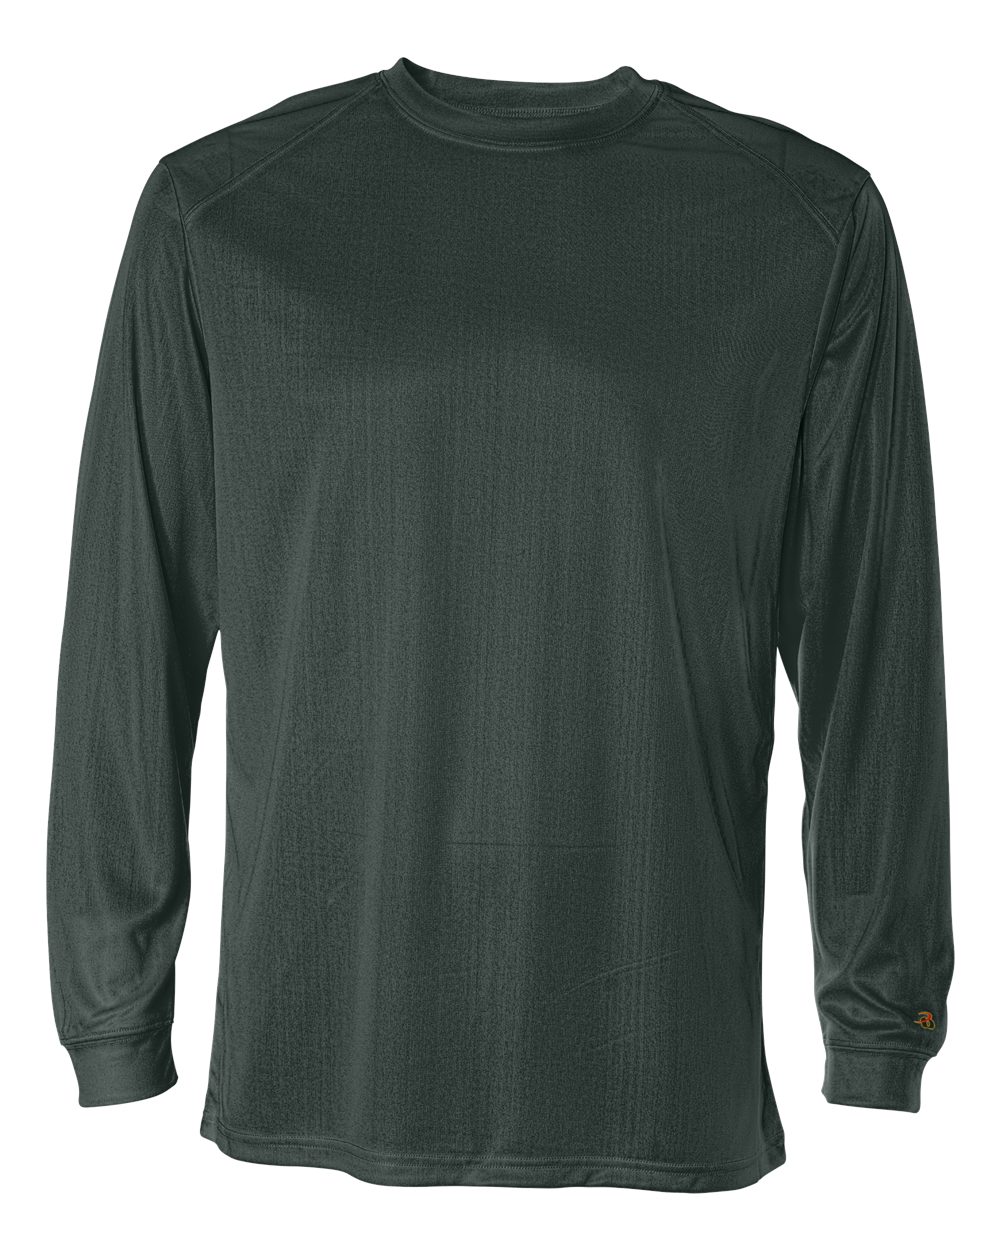 B-Core - Performance Long Sleeve T-Shirt - Campus Ink